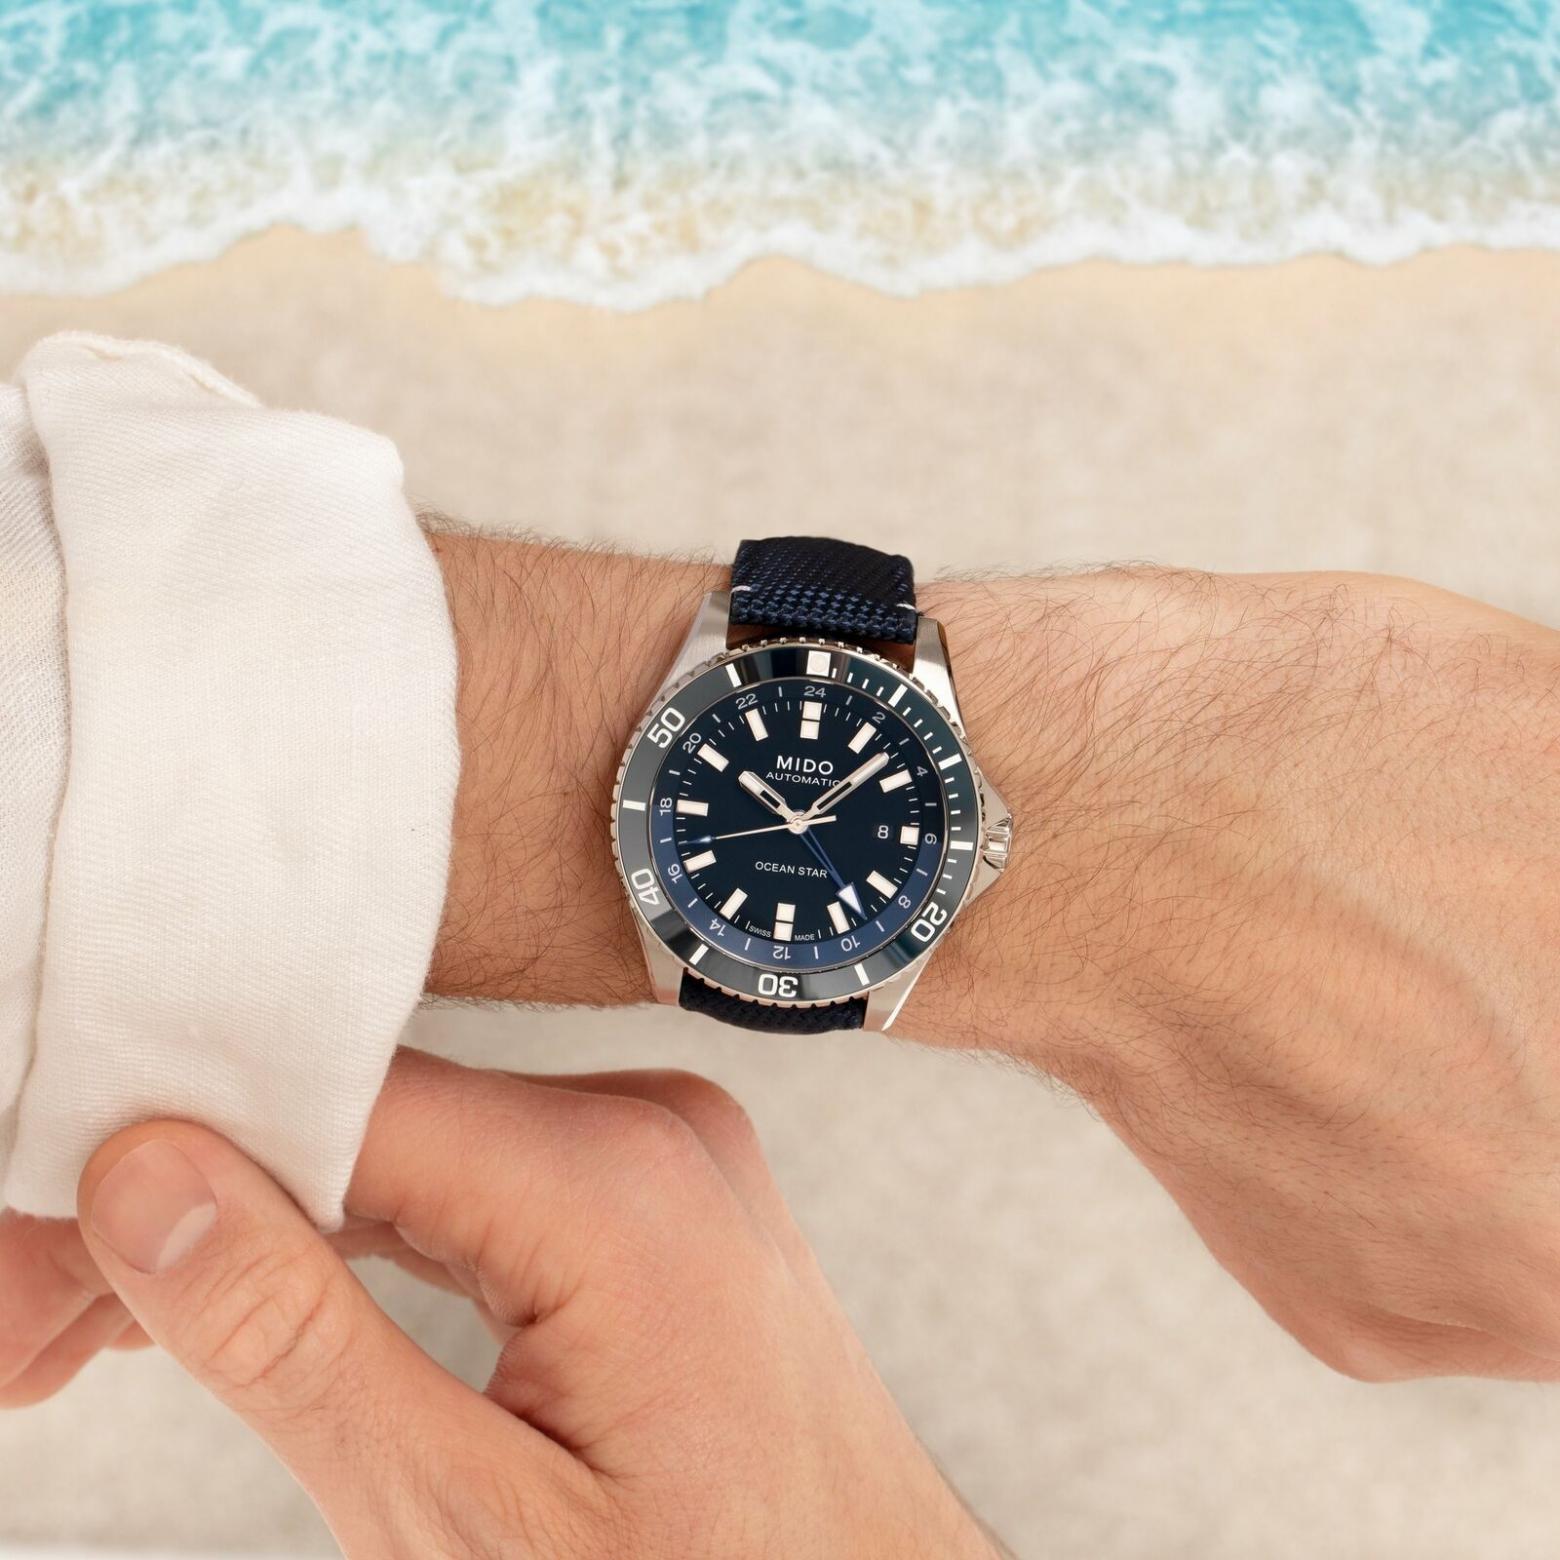 Mido Ocean Star GMT: One of the Best Value-For-Money Dive Watches